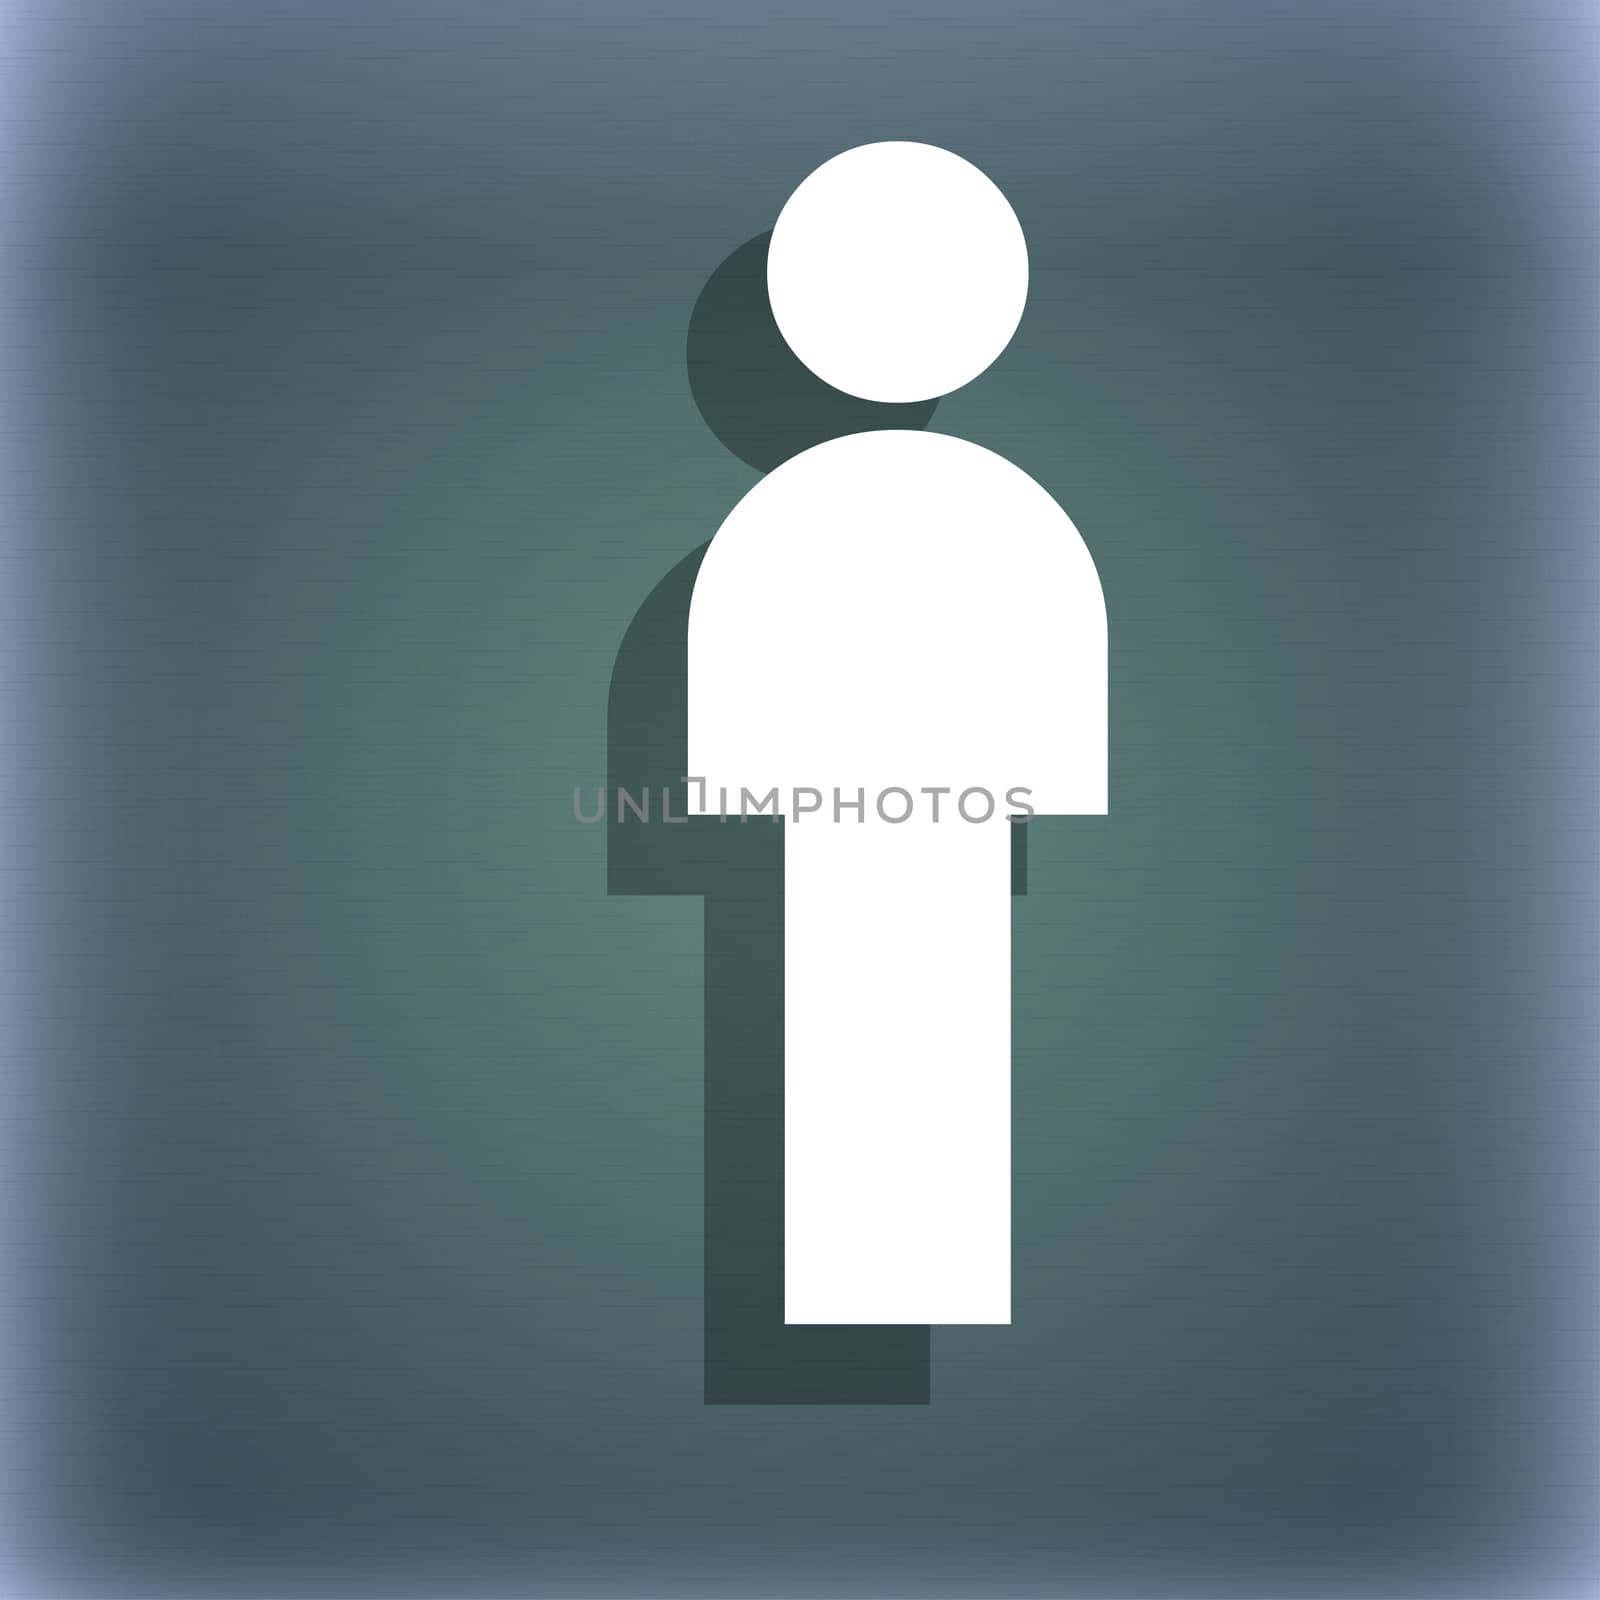 Human sign icon. Man Person symbol. Male toilet. On the blue-green abstract background with shadow and space for your text. illustration